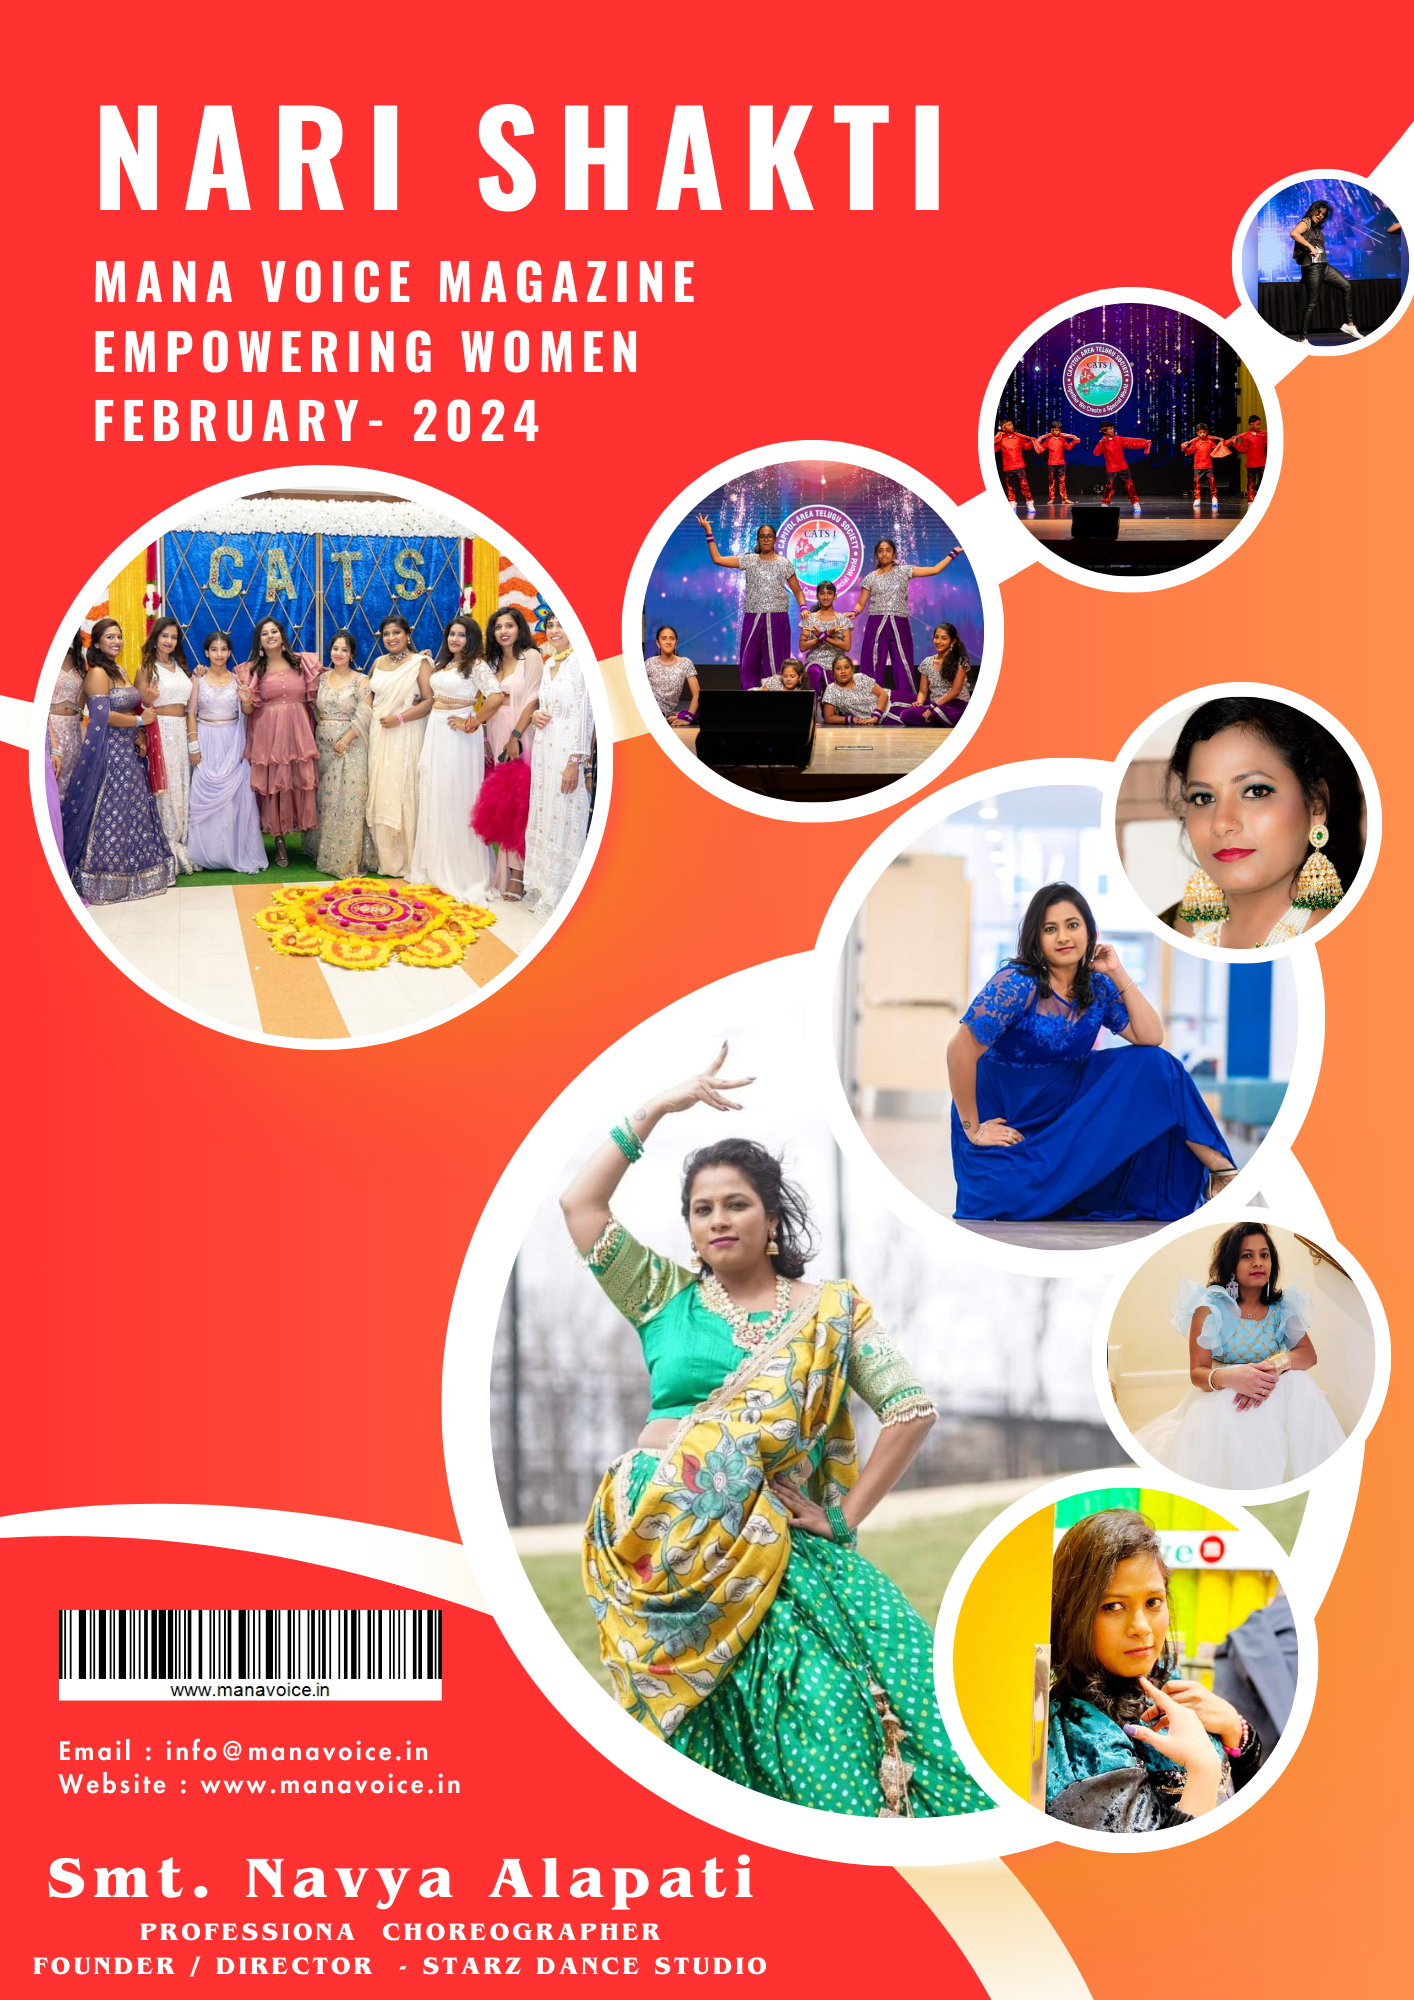 Navya Alapati- Successful Entrepreneur: A Journey from Tradition to Triumph - Inspiring the World through Dance, Passion, and Community Empowerment | Nari Shakti - Empowering Women | Mana Voice